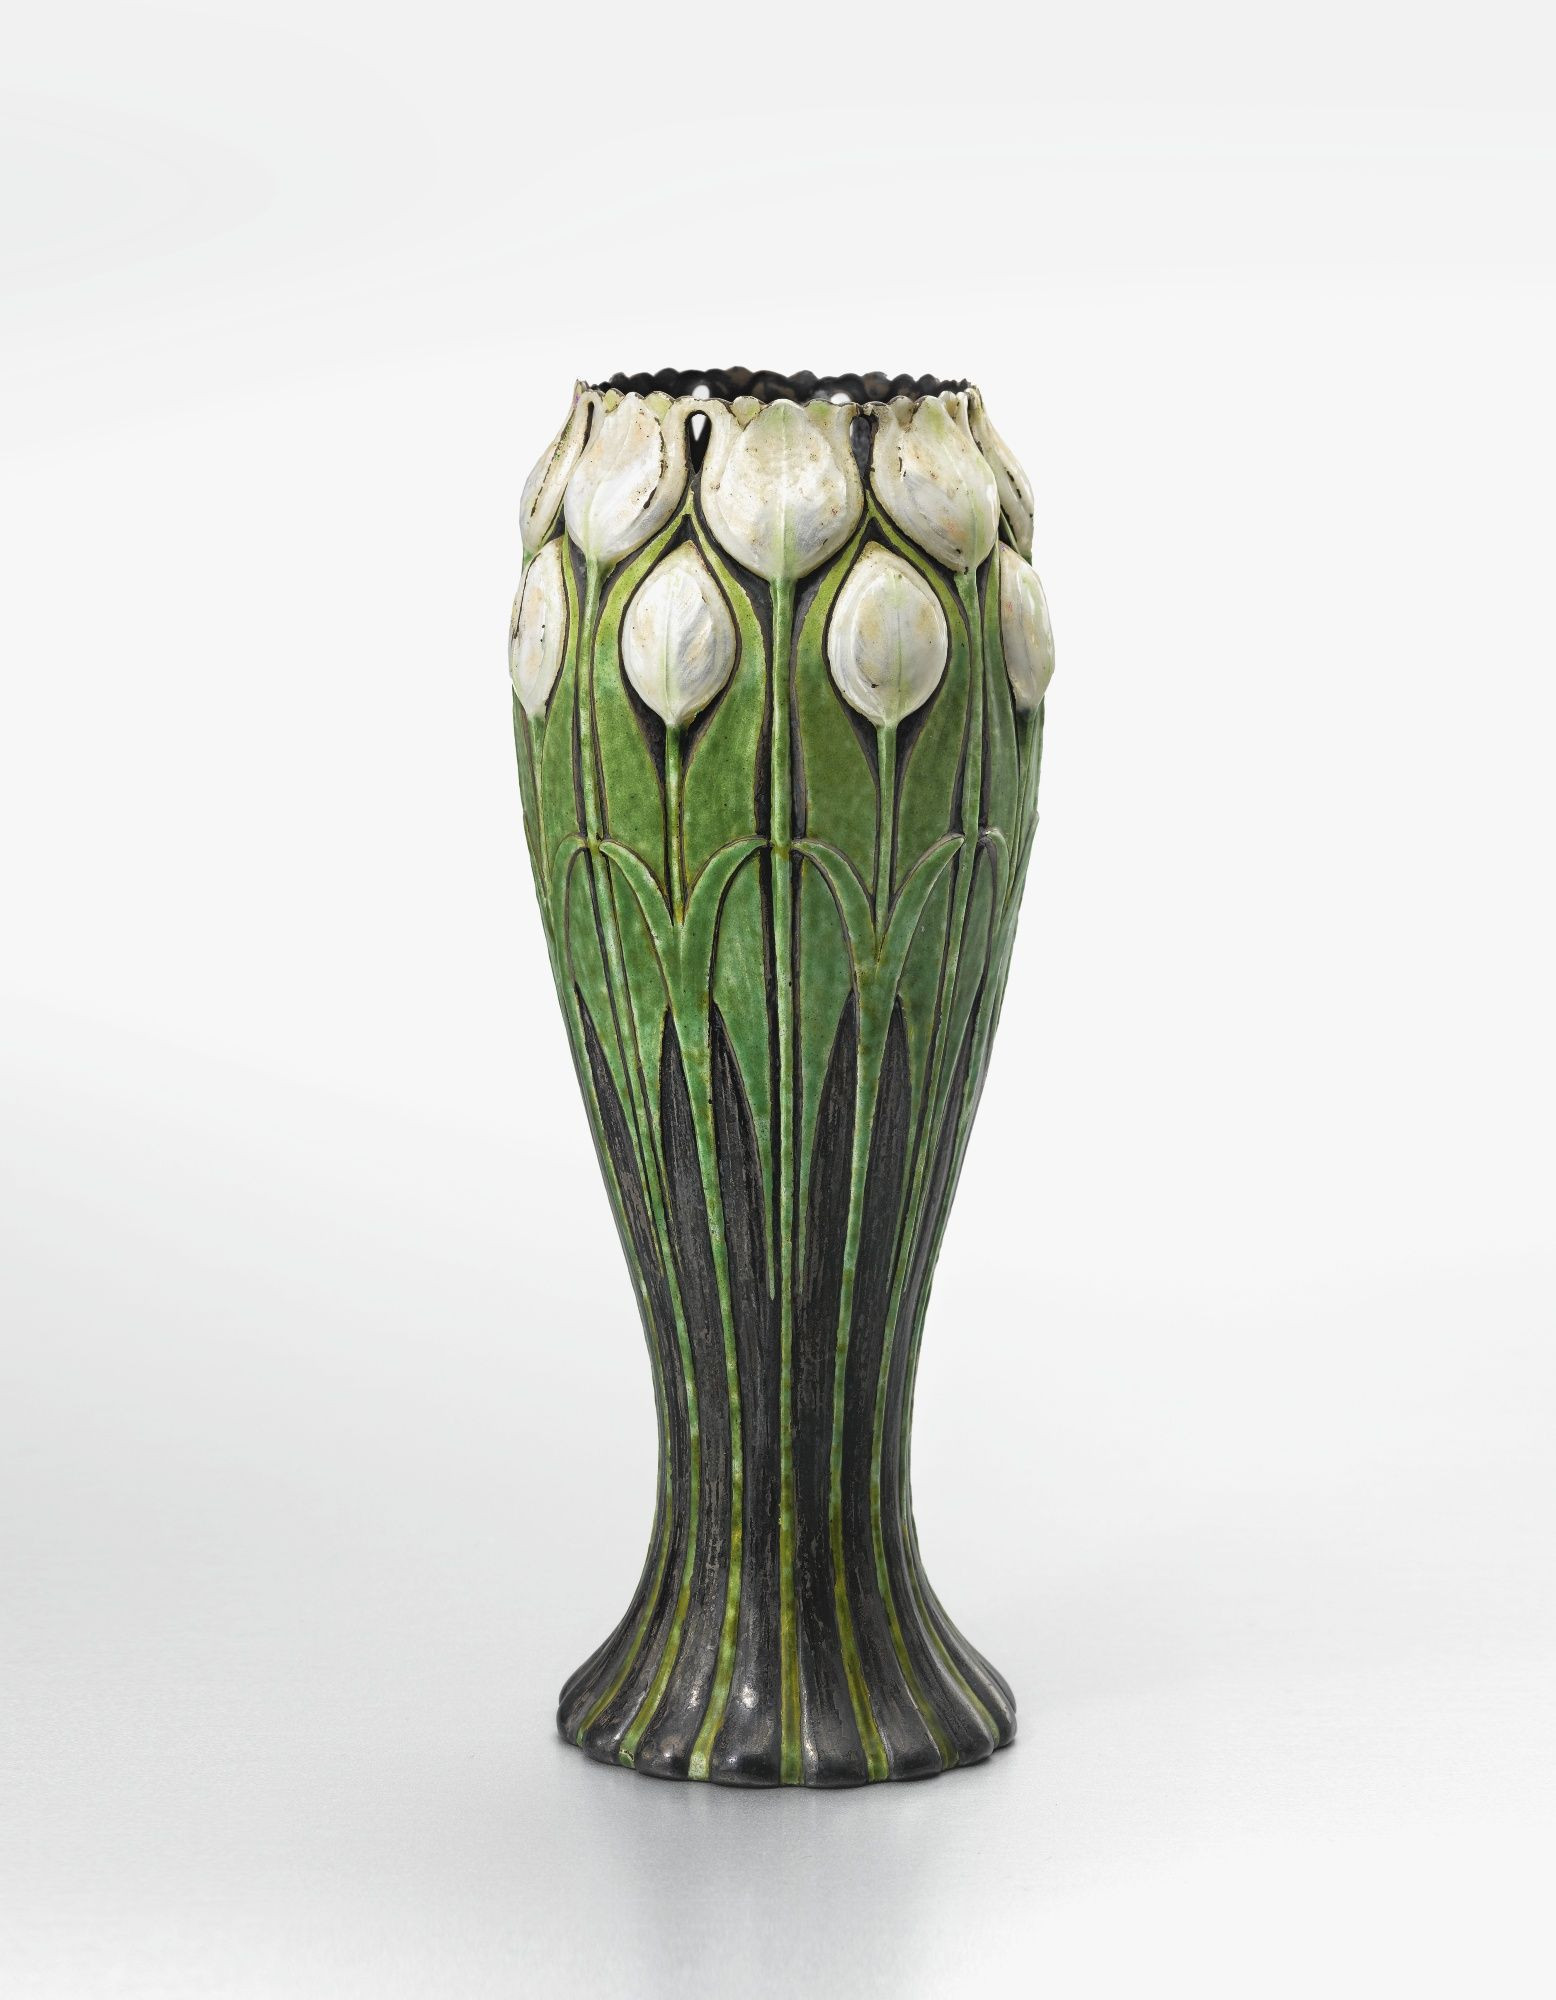 24 Best Tulip Vase for Sale 2024 free download tulip vase for sale of crystal vase prices images tiffany co tulip vase impressed with regard to crystal vase prices images tiffany co tulip vase impressed tiffany co makers 4105